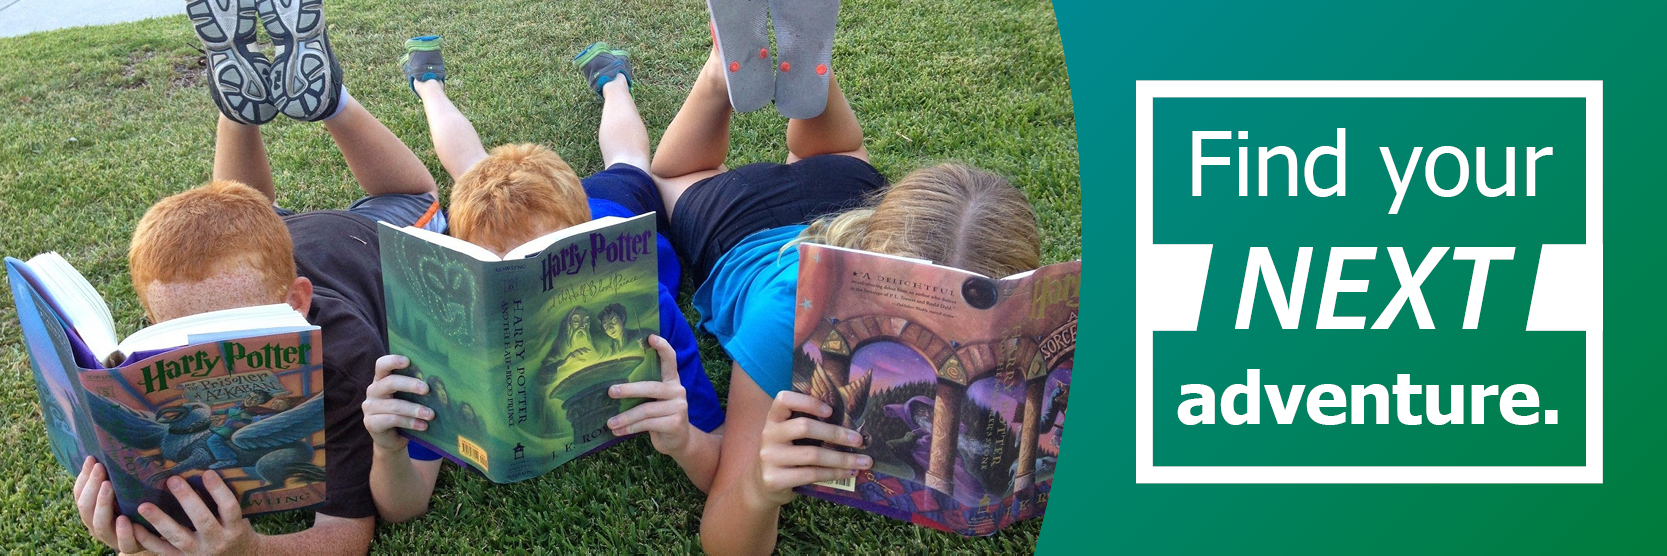 Using Your Card header showing three kids on the grass reading Harry Potter books with the words "Find Your Next Adventure"